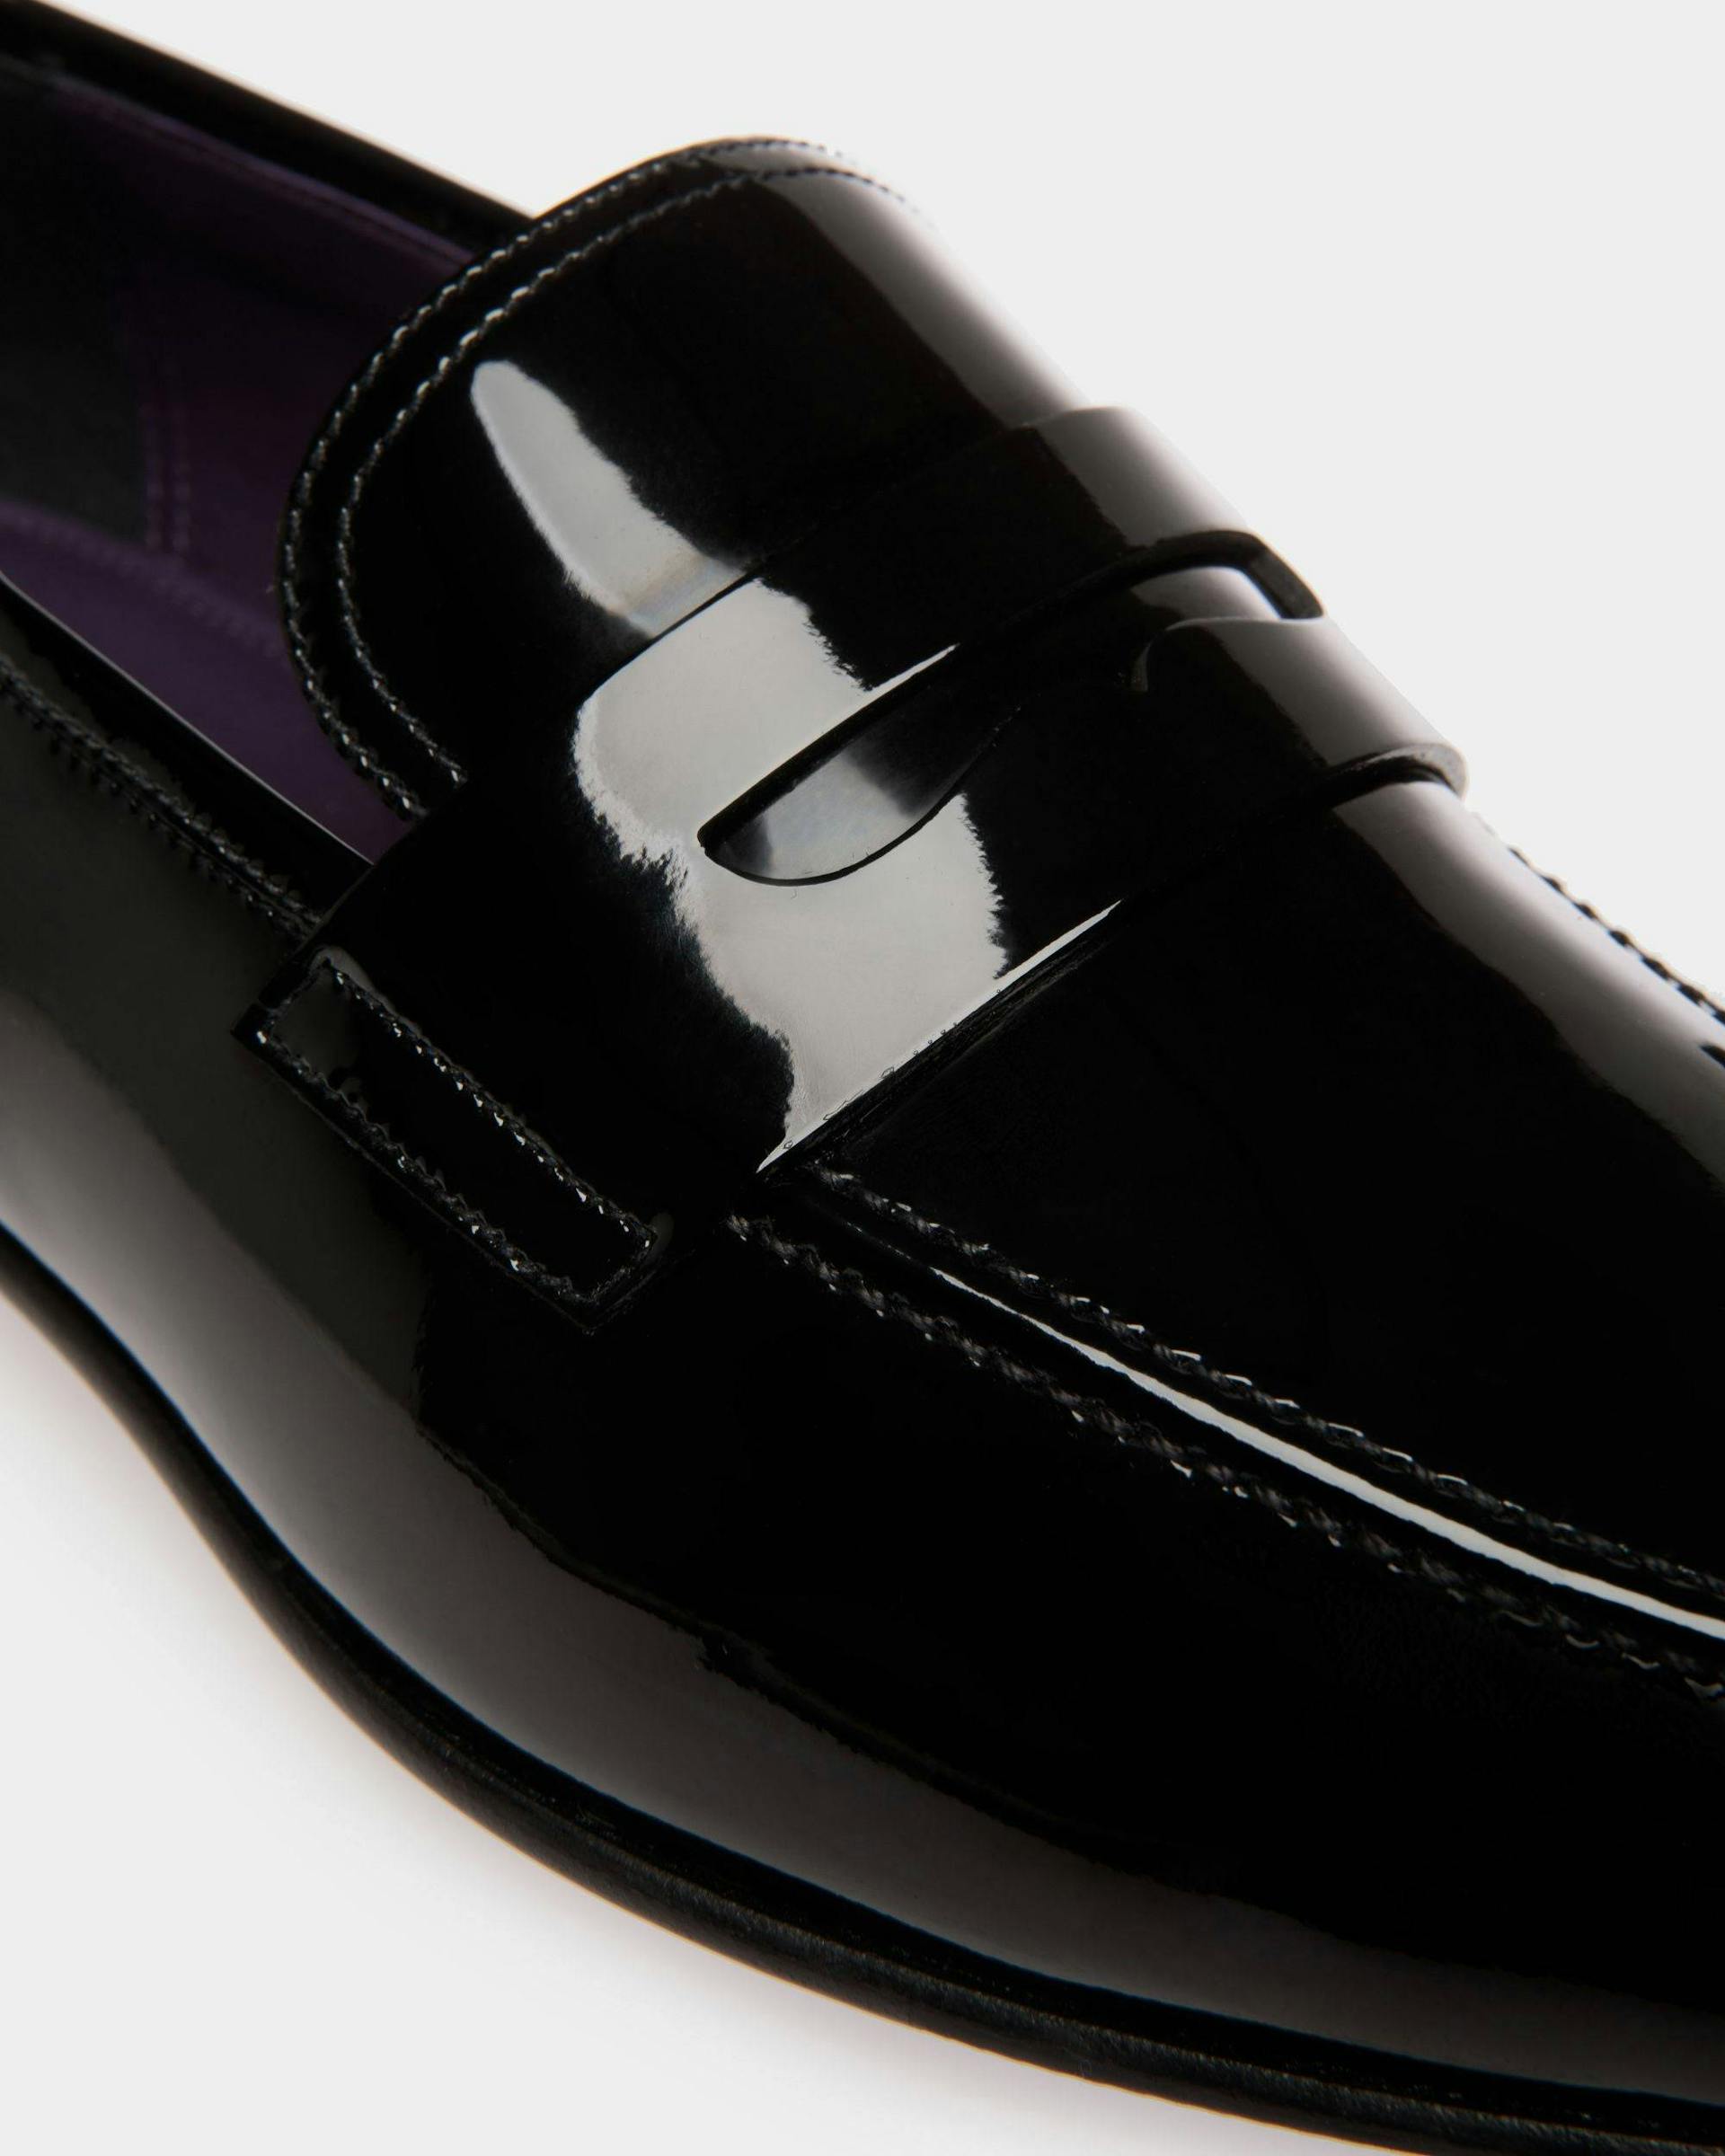 Men's Suisse Loafer in Black Patent Leather | Bally | Still Life Detail